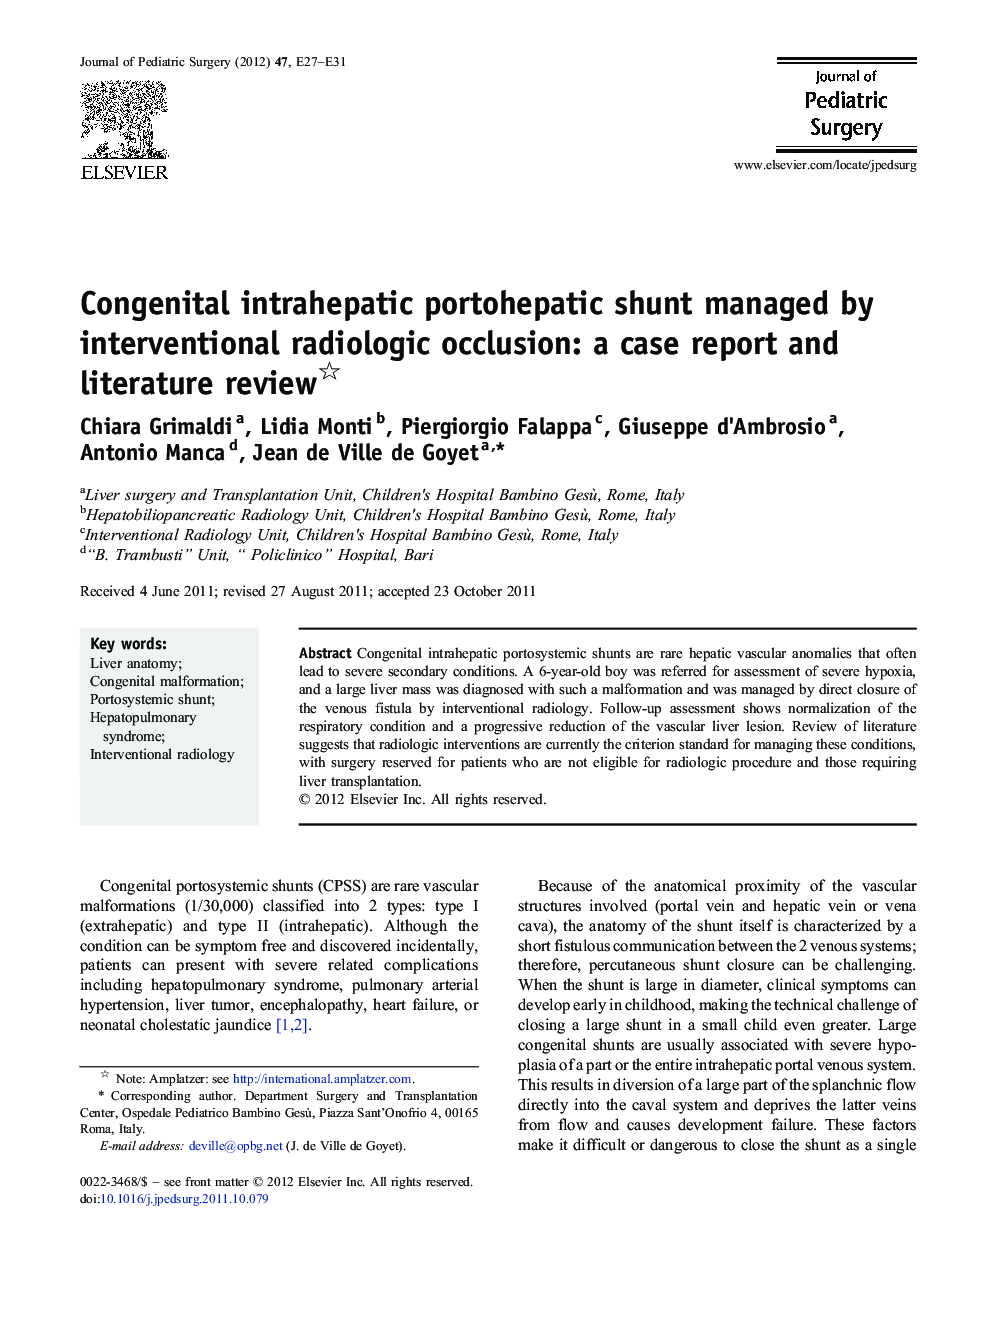 Congenital intrahepatic portohepatic shunt managed by interventional radiologic occlusion: a case report and literature review 